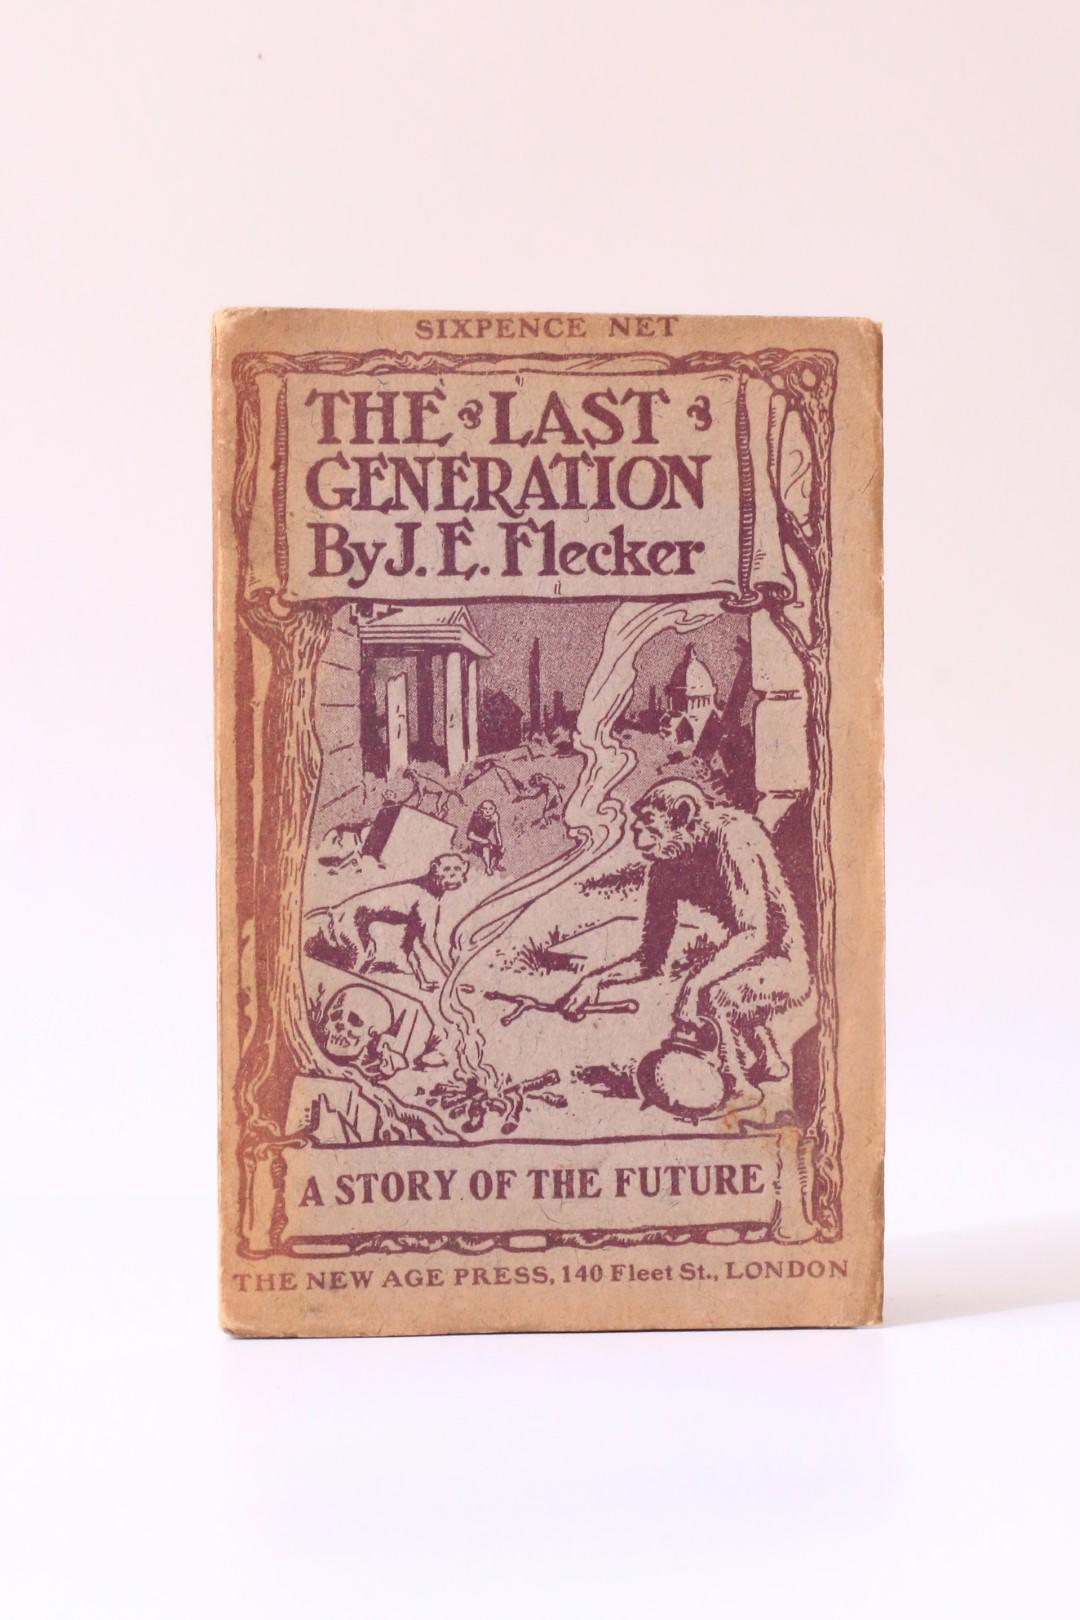 J.E. Flecker - The Last Generation: A Story of the Future - The New Age Press, 1908, First Edition.